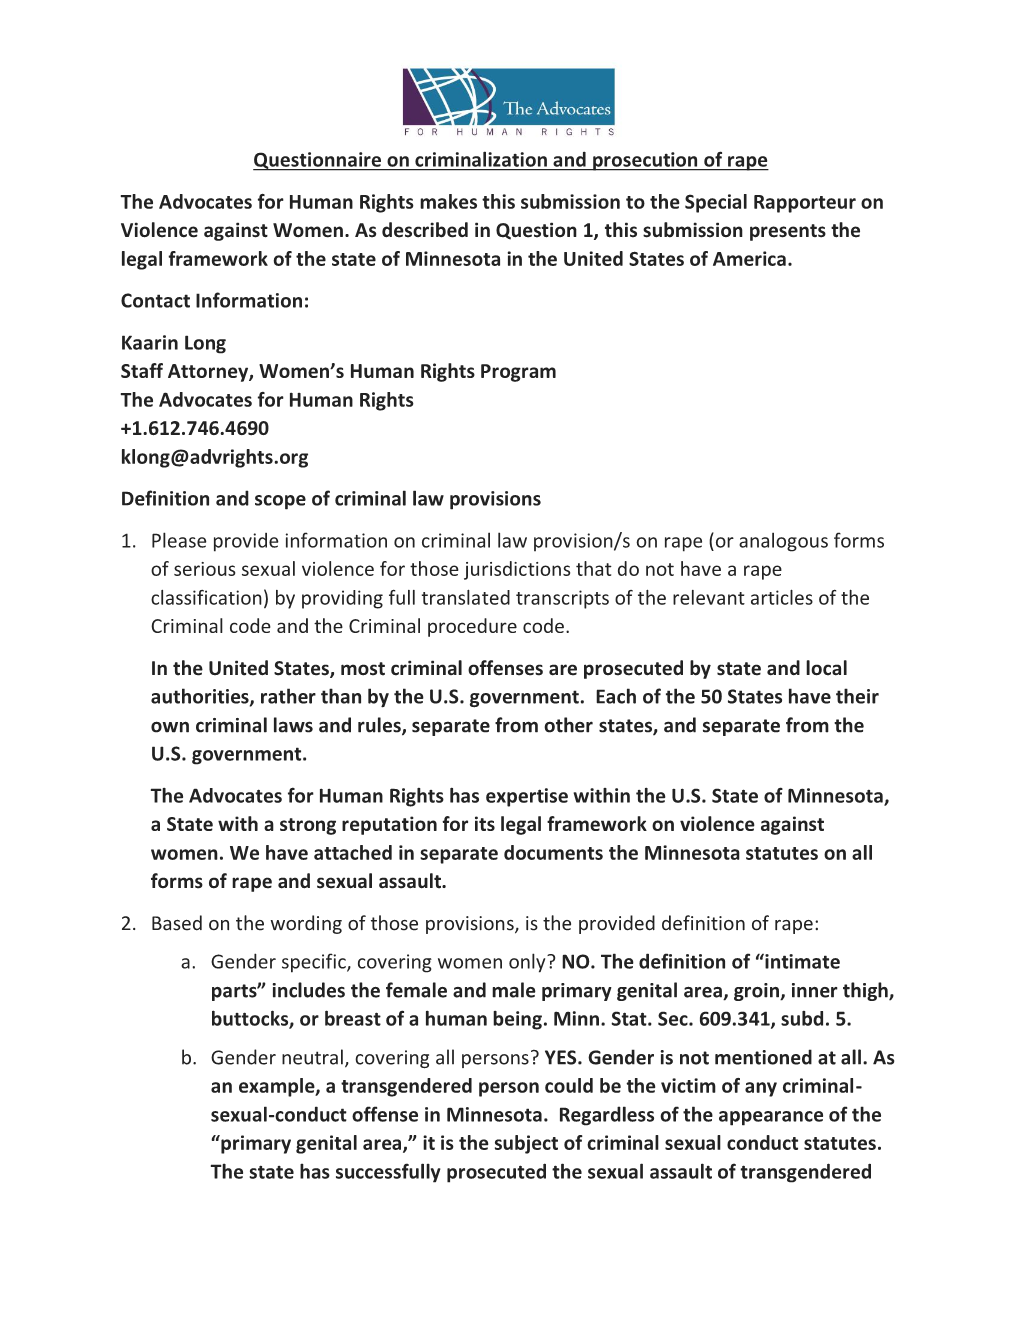 Questionnaire on Criminalization and Prosecution of Rape the Advocates for Human Rights Makes This Submission to the Special Rapporteur on Violence Against Women